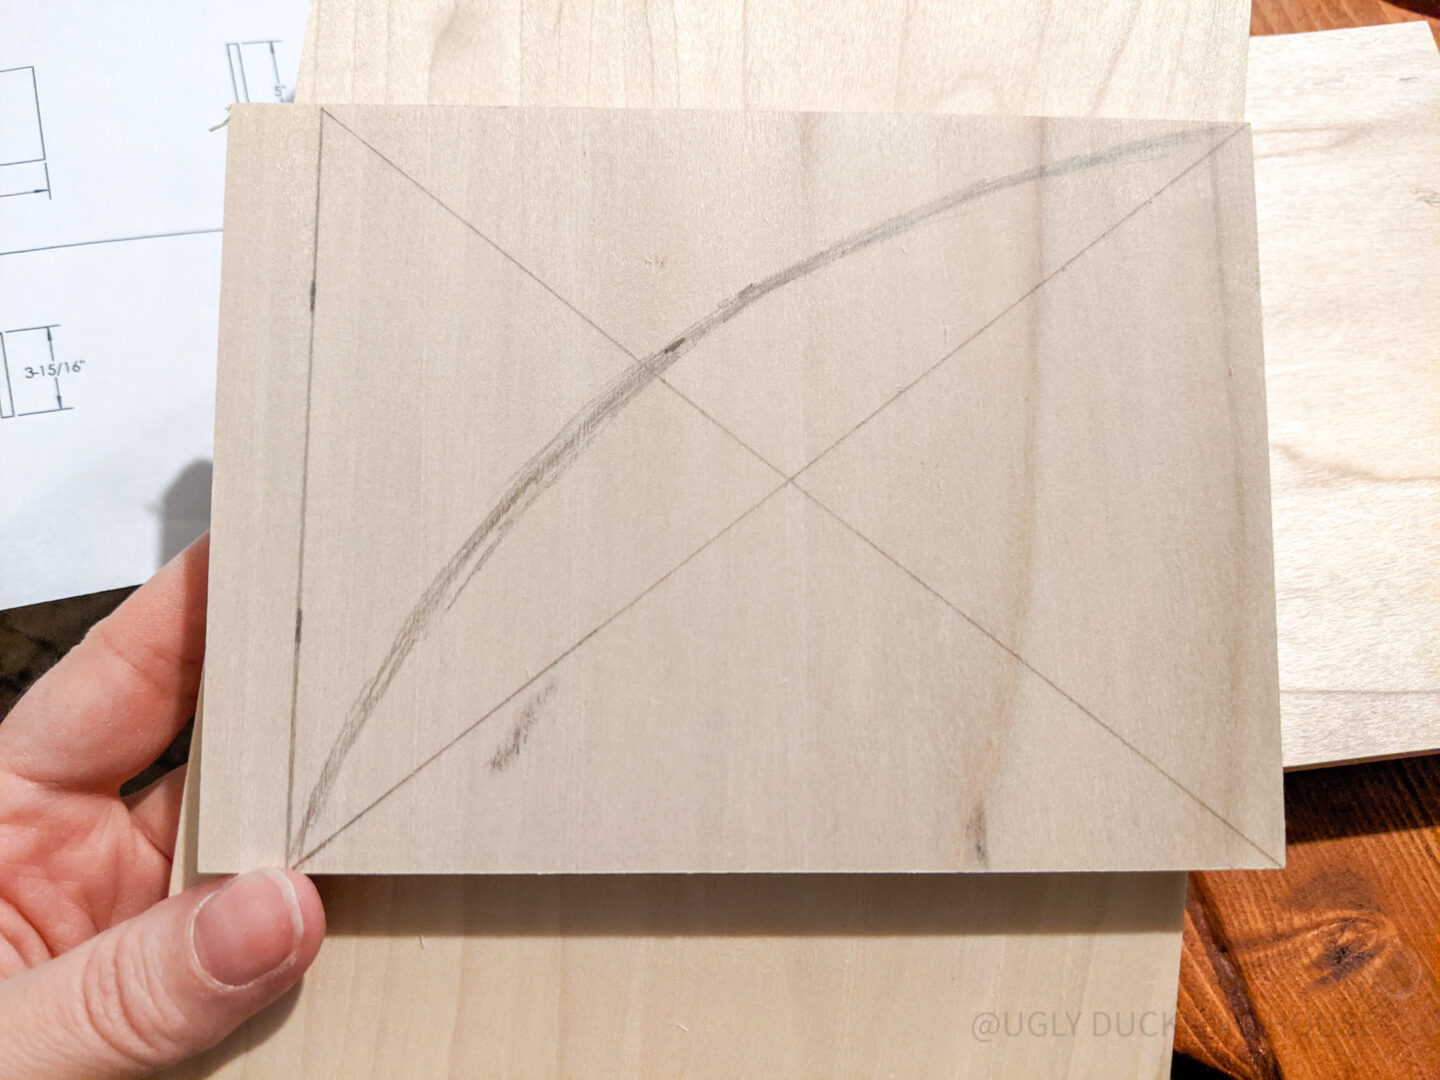 draw and cut the curve of the sides and dividers